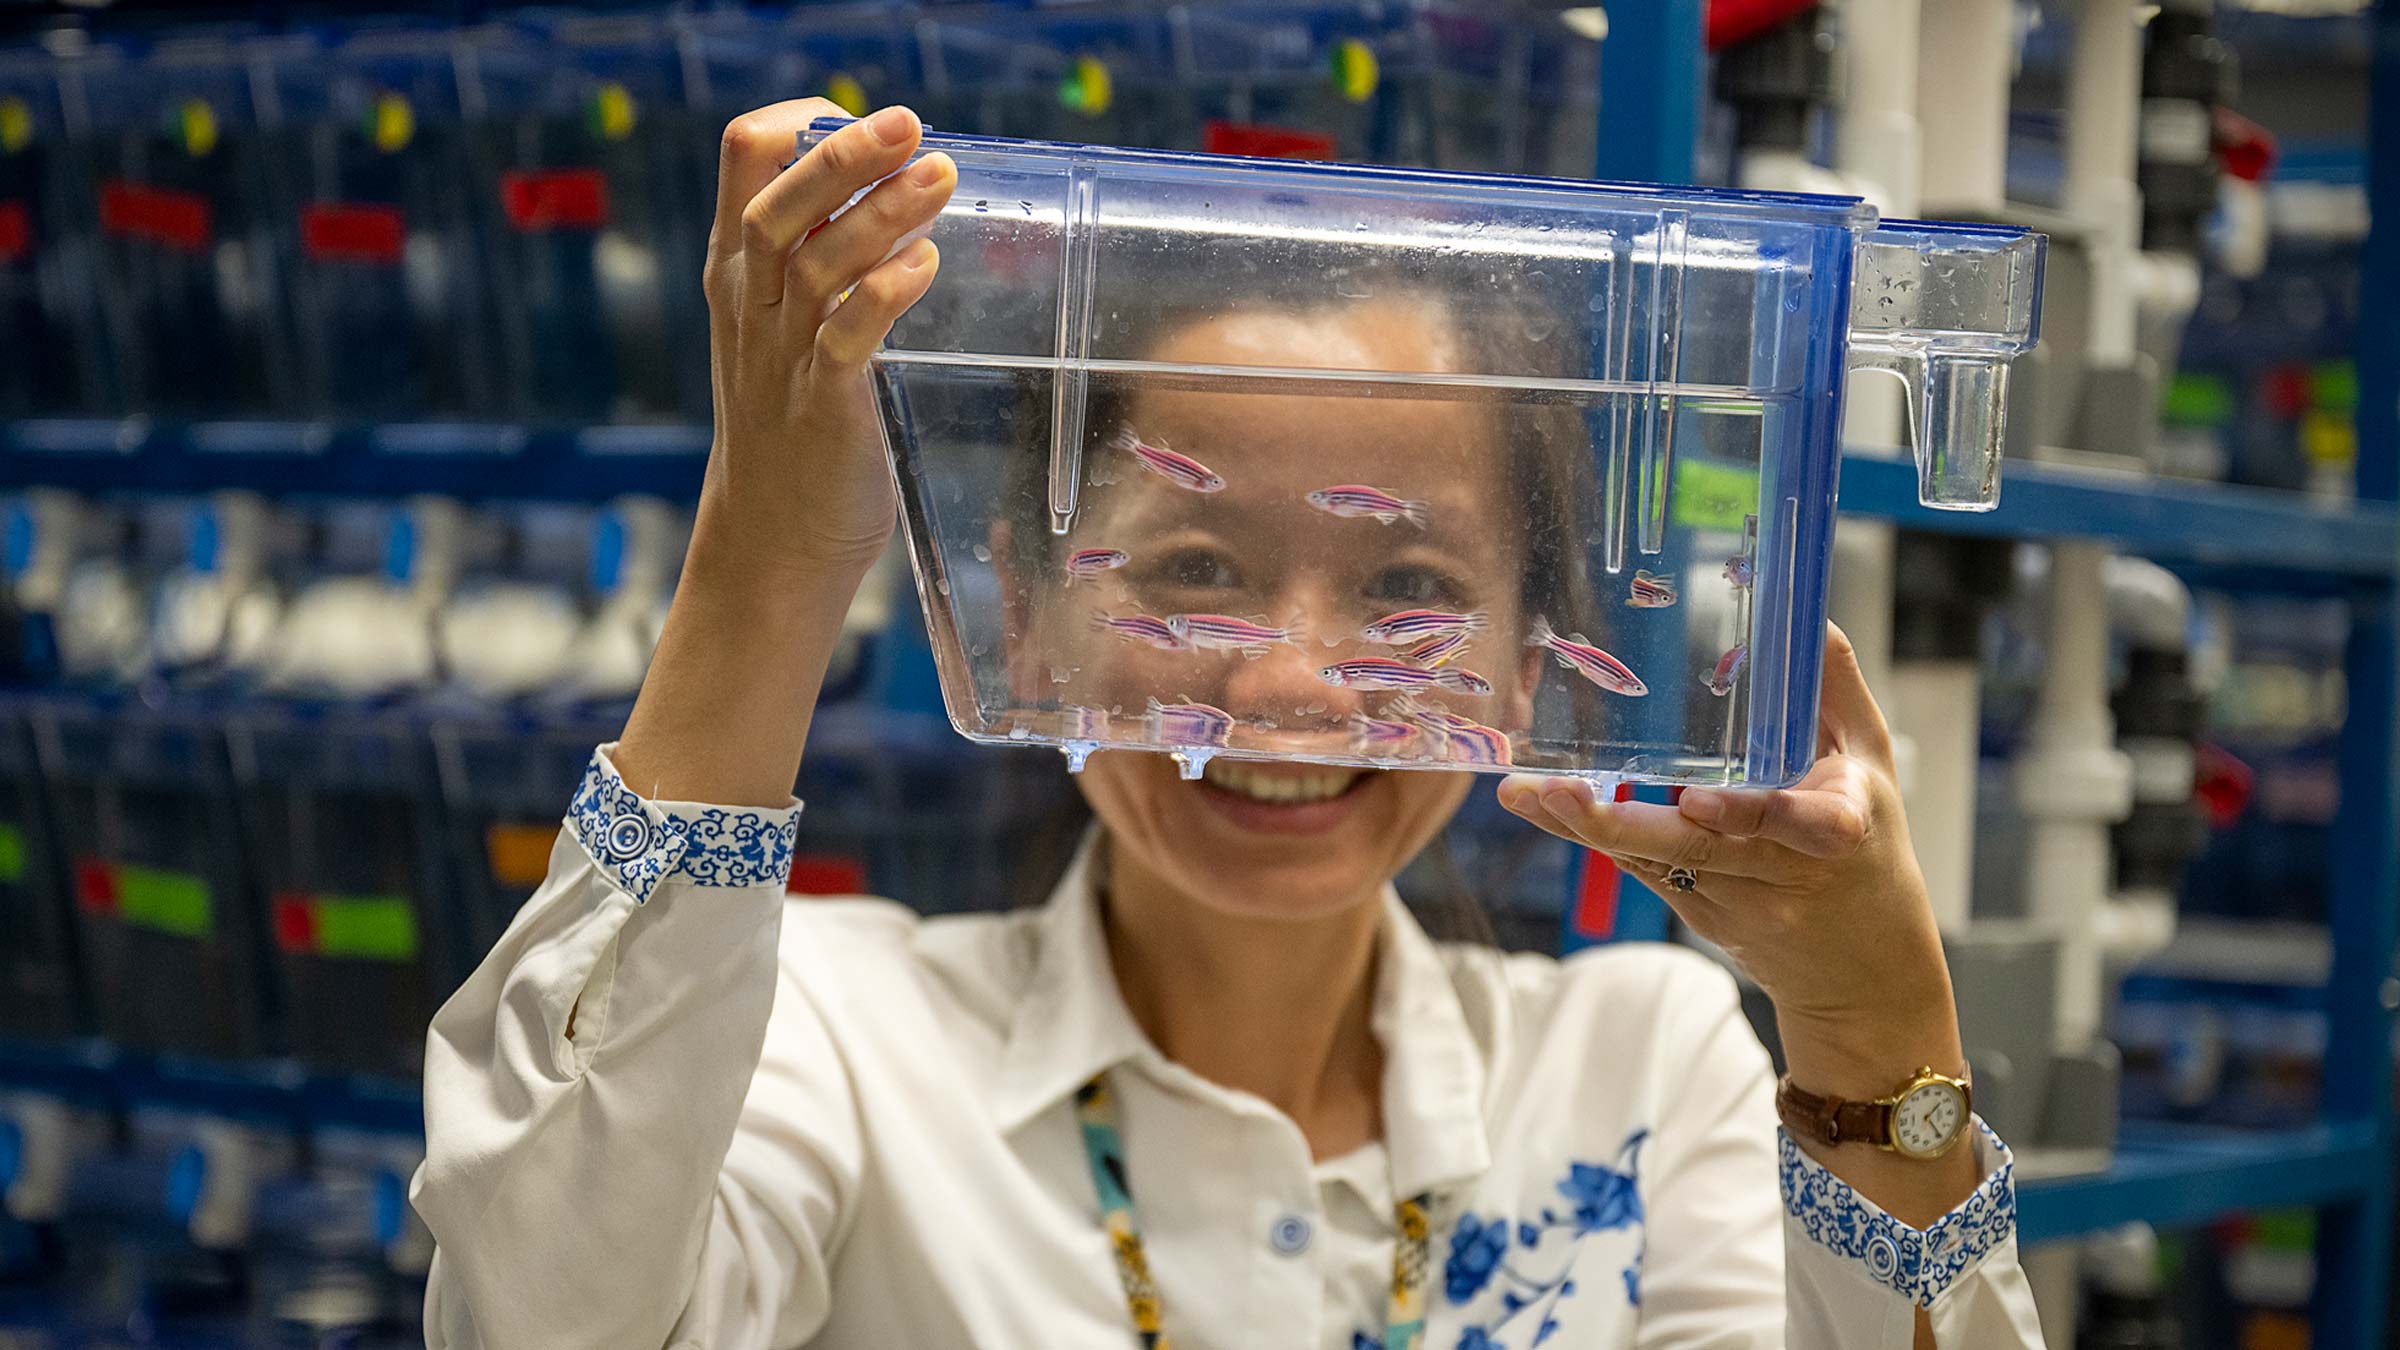 Researcher holding a tank of zebrafish